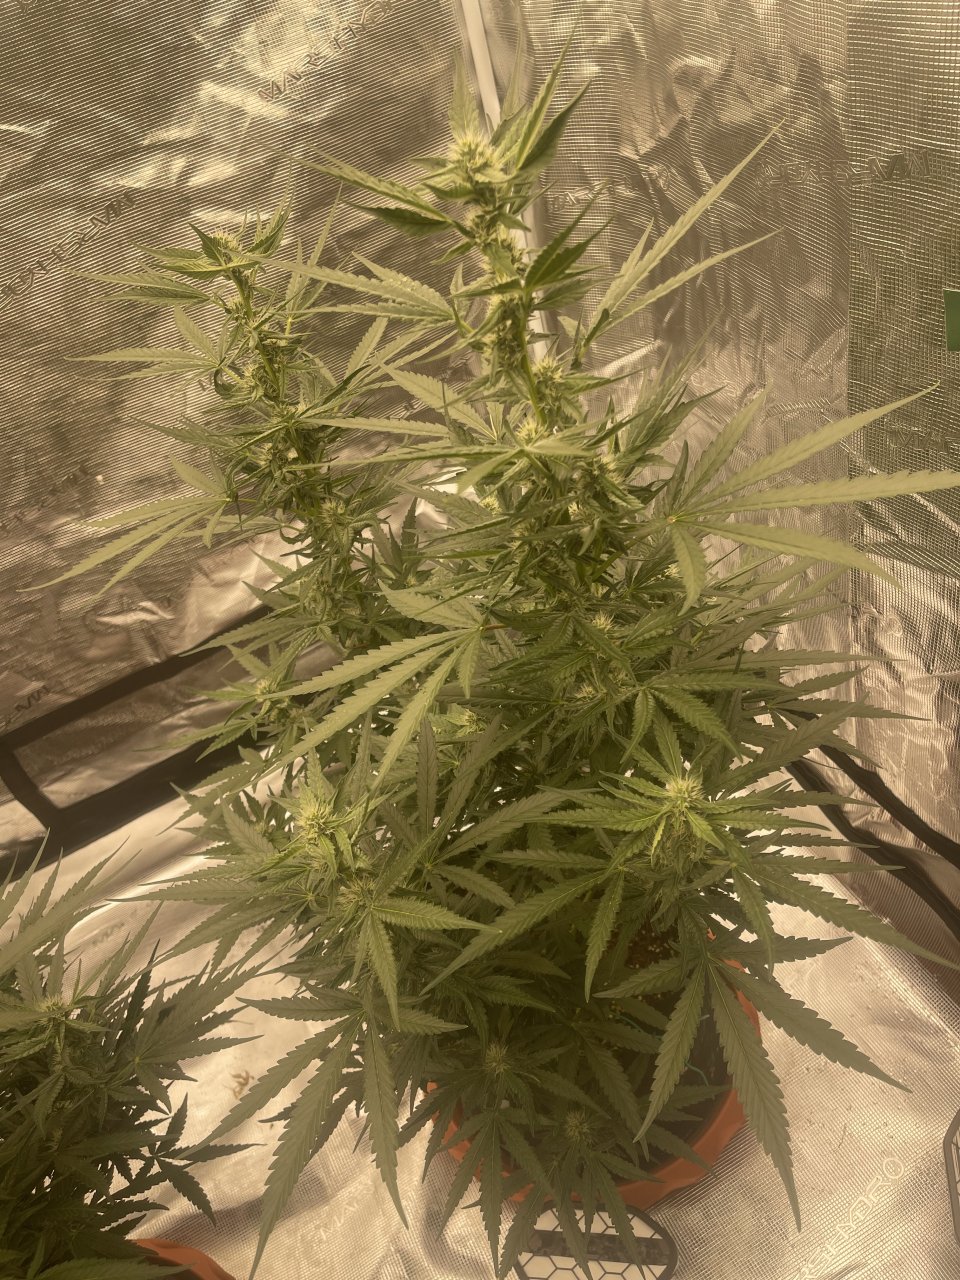 Banners day 27 Flower